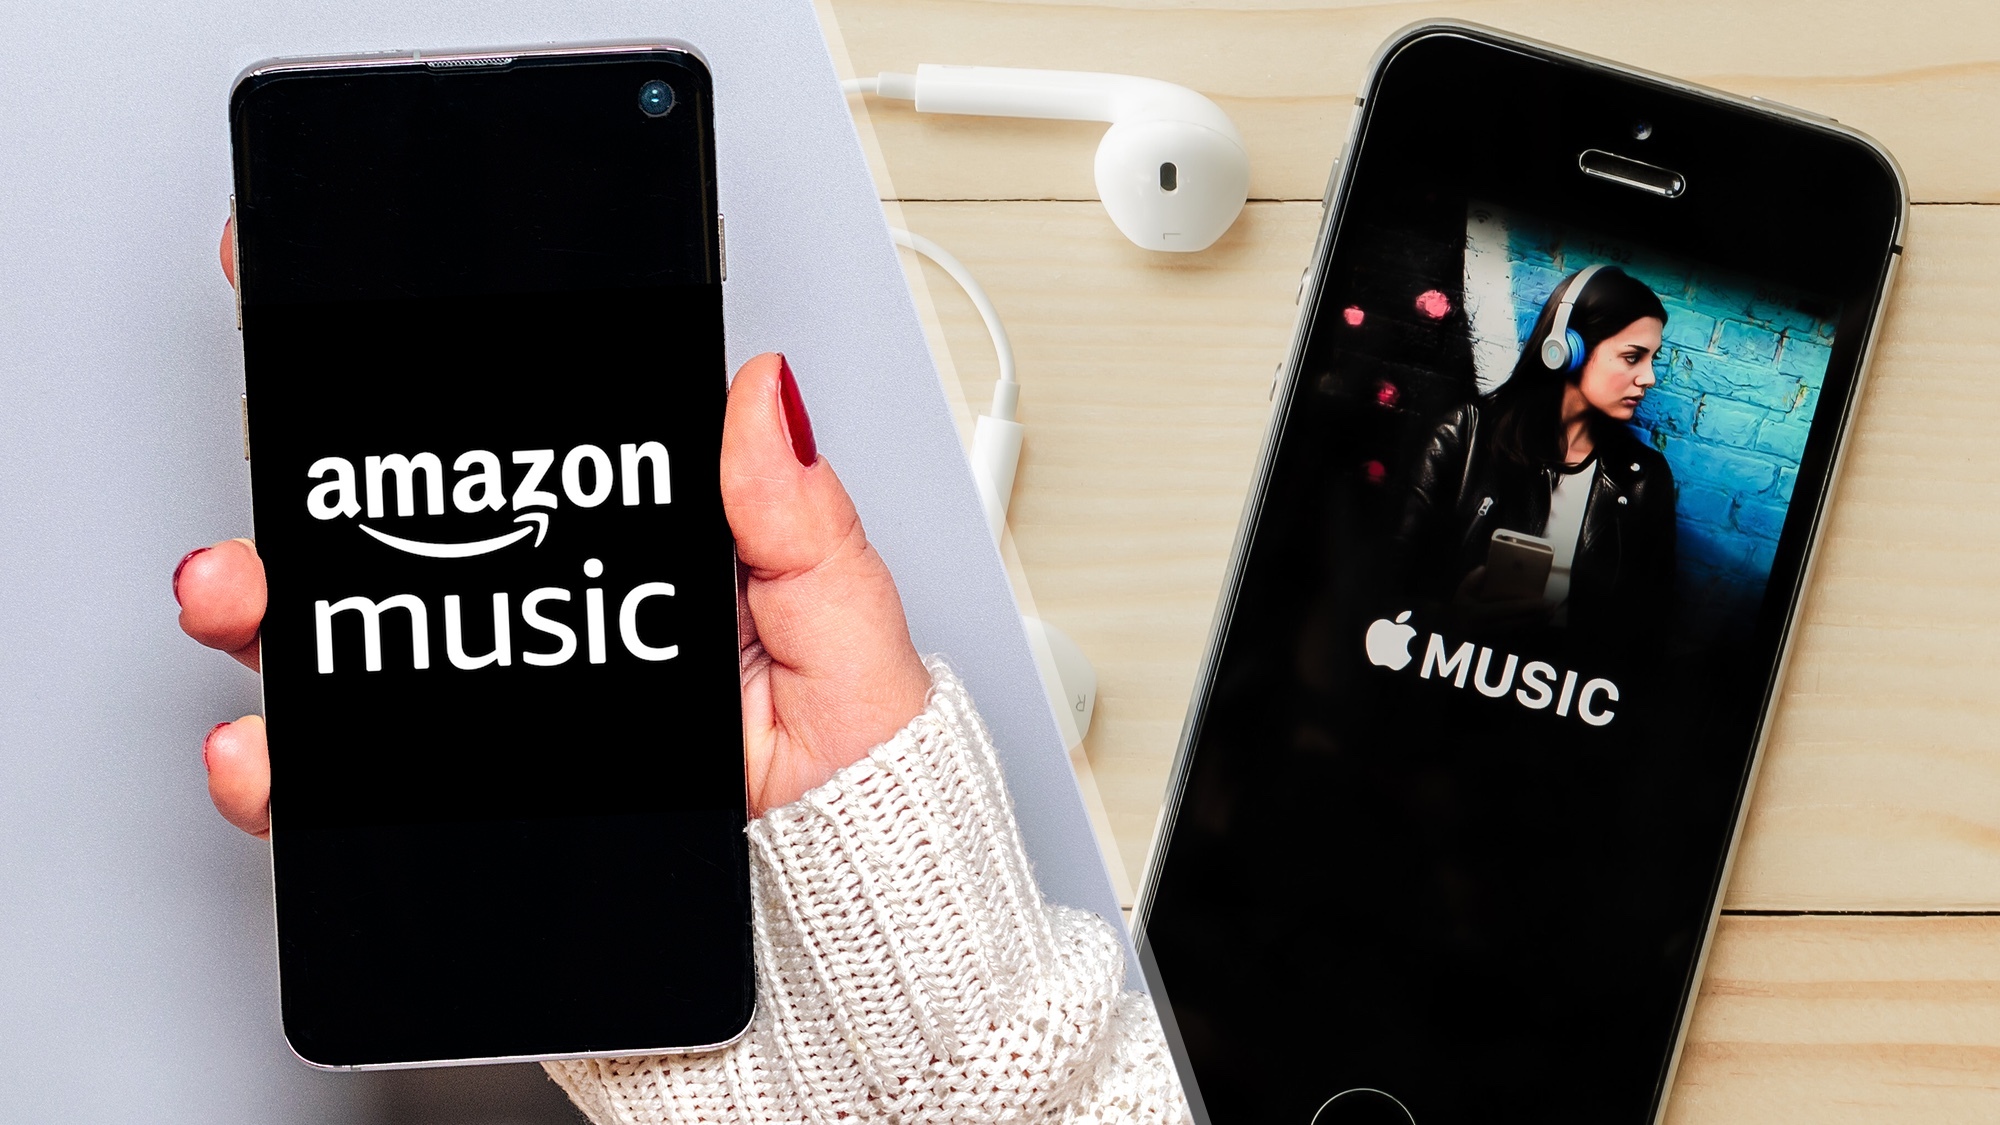 Apple Music vs. Amazon Music: Which music service wins? | Tom's Guide